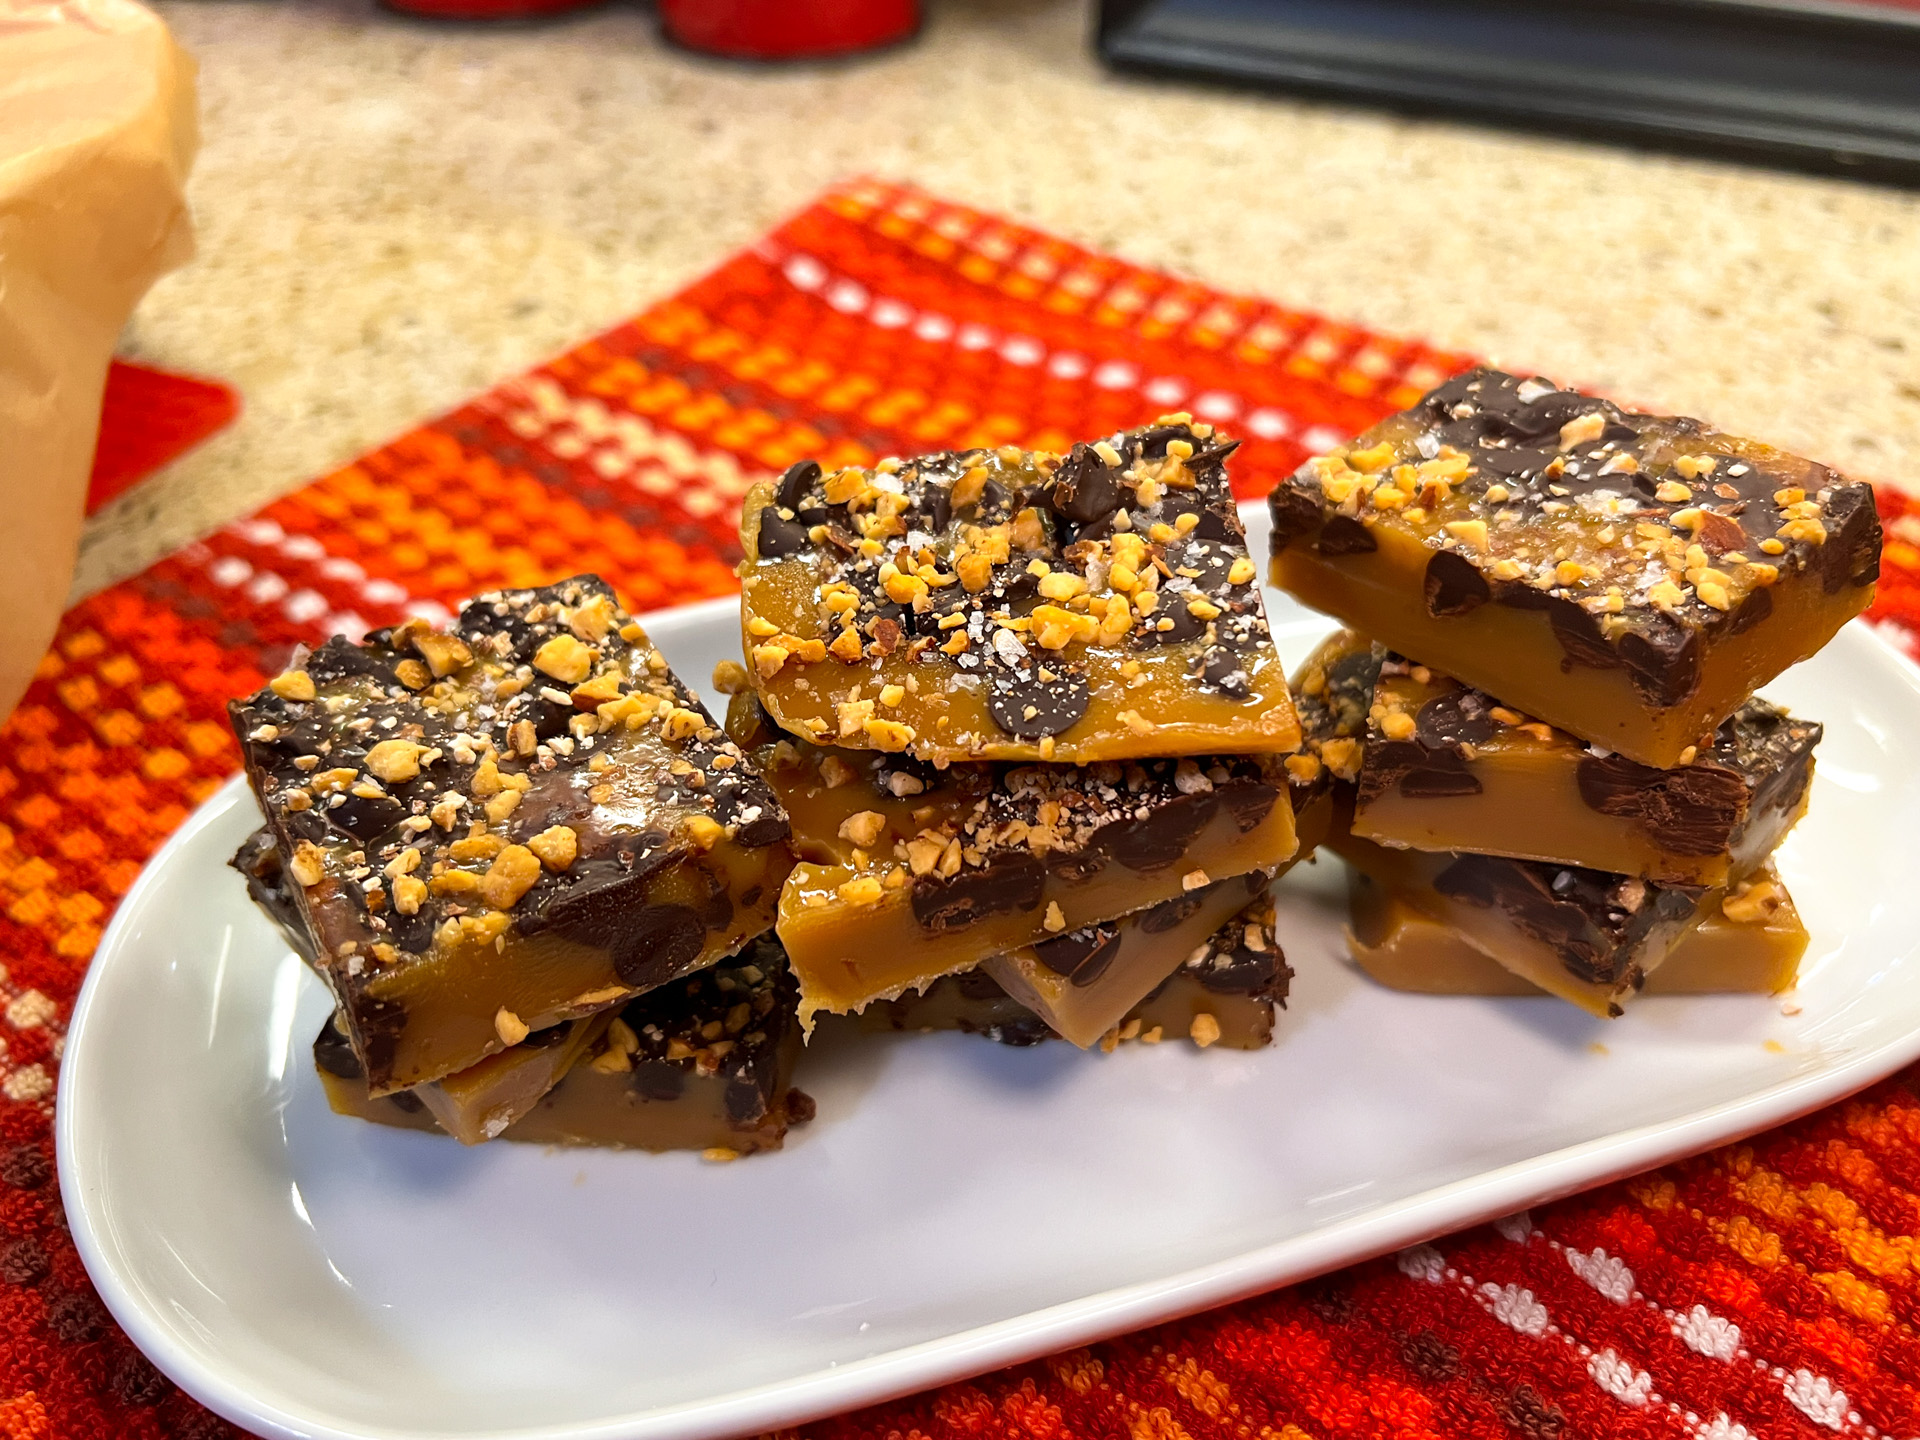 Chewy Keto Caramel Candy - Fit Mom Journey